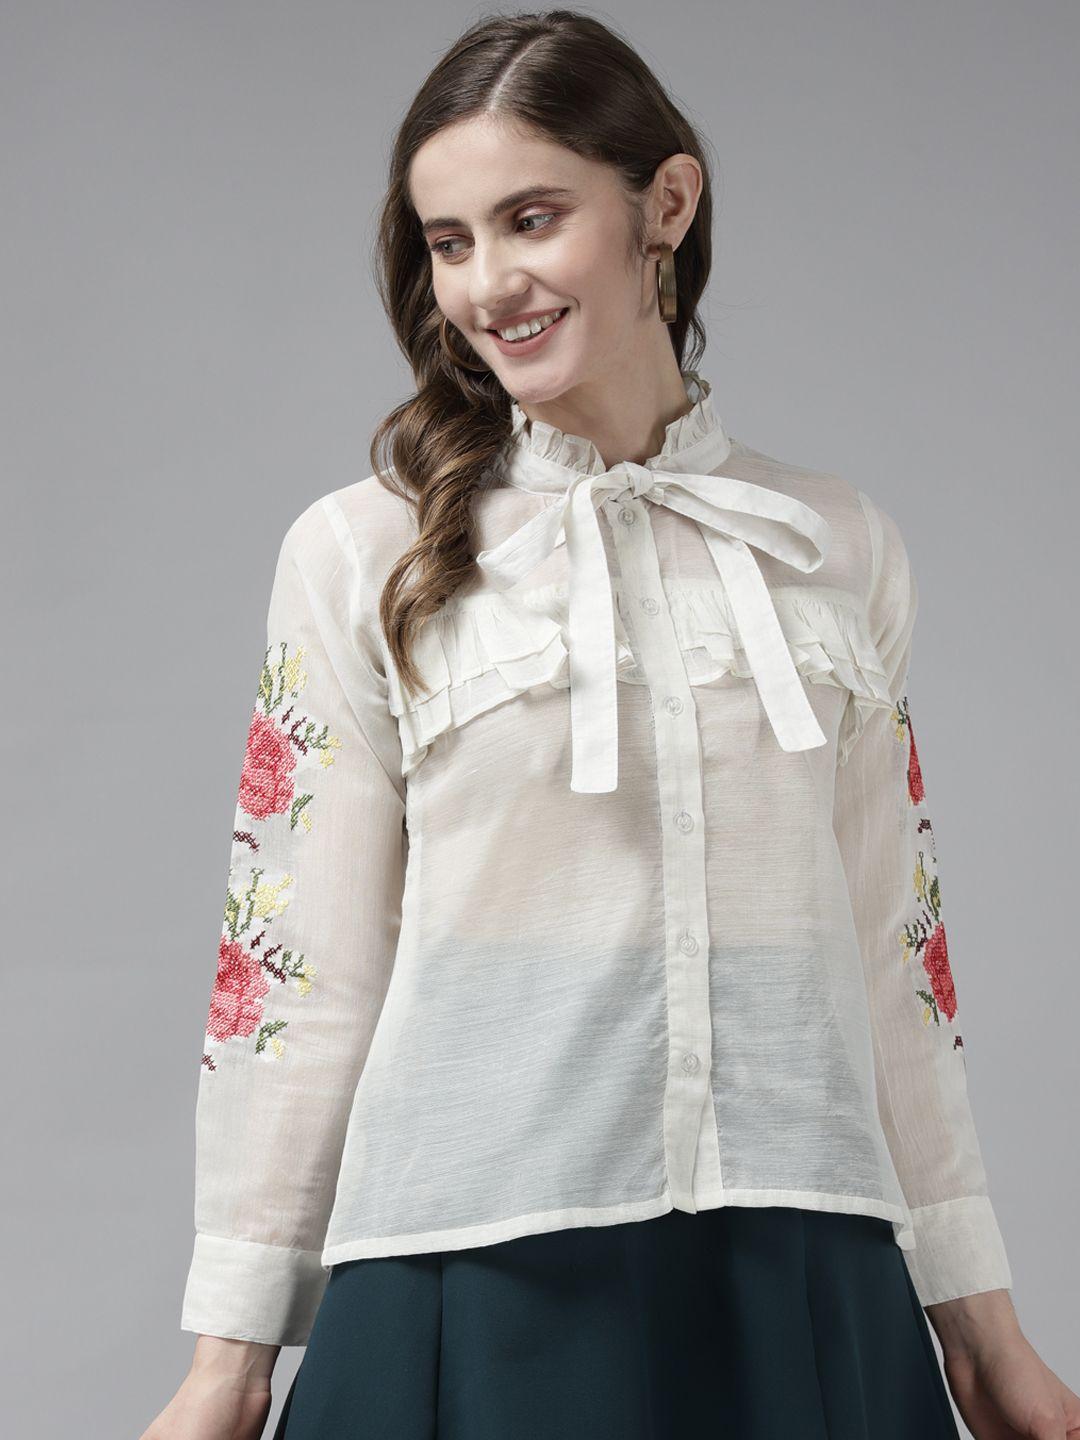 bhama couture off white embroidered tie-up neck ruffles shirt style top